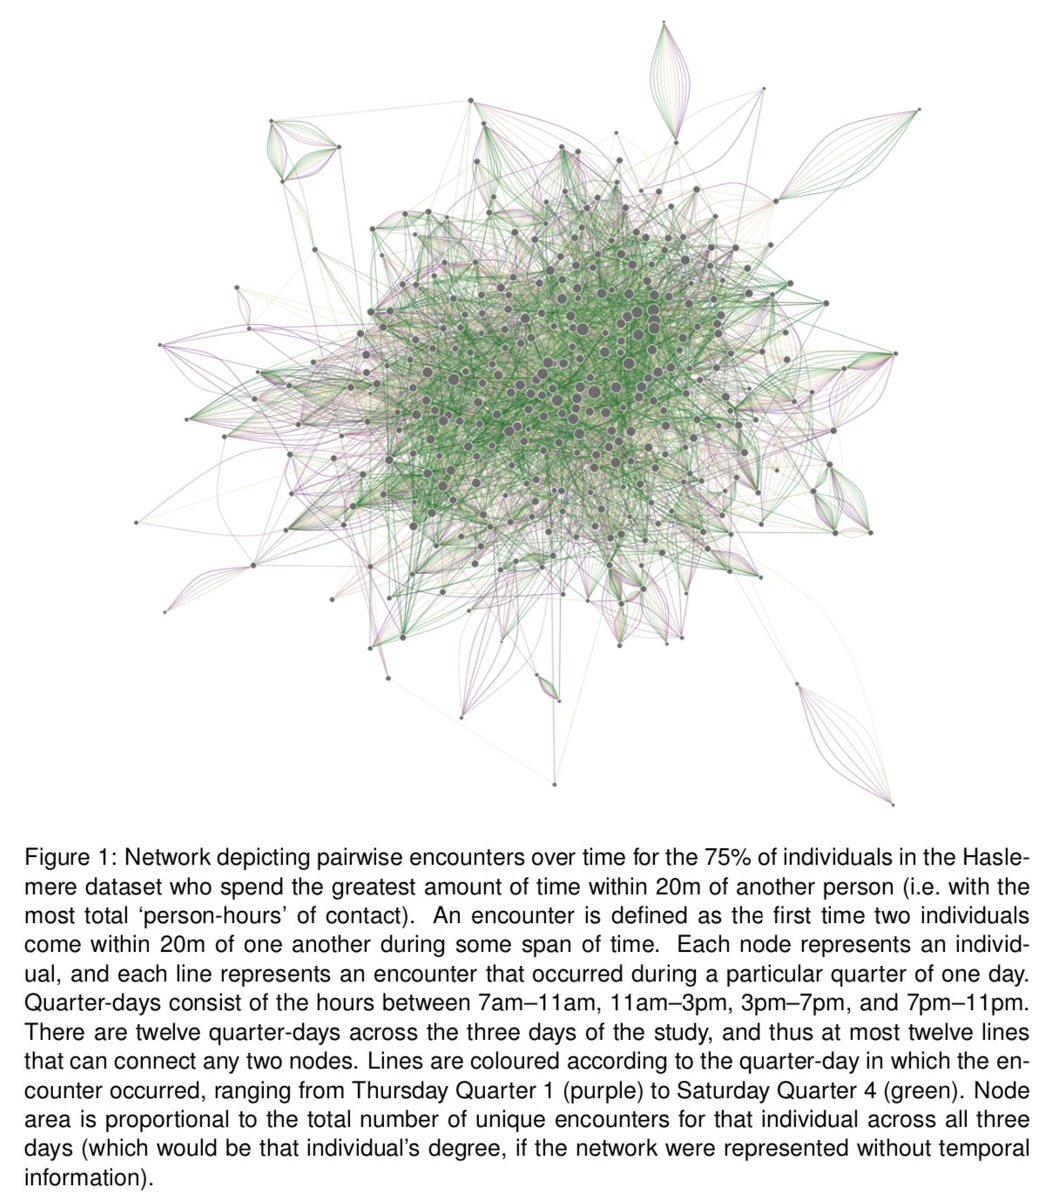 Network models often assume individual popularity is fixed: some people have lot of contacts and others don't. But human interactions can be wonderfully dynamic over time. In BBC Pandemic study, contact (and hence outbreak) dynamics could vary a lot.  https://www.biorxiv.org/content/10.1101/479154v2 5/